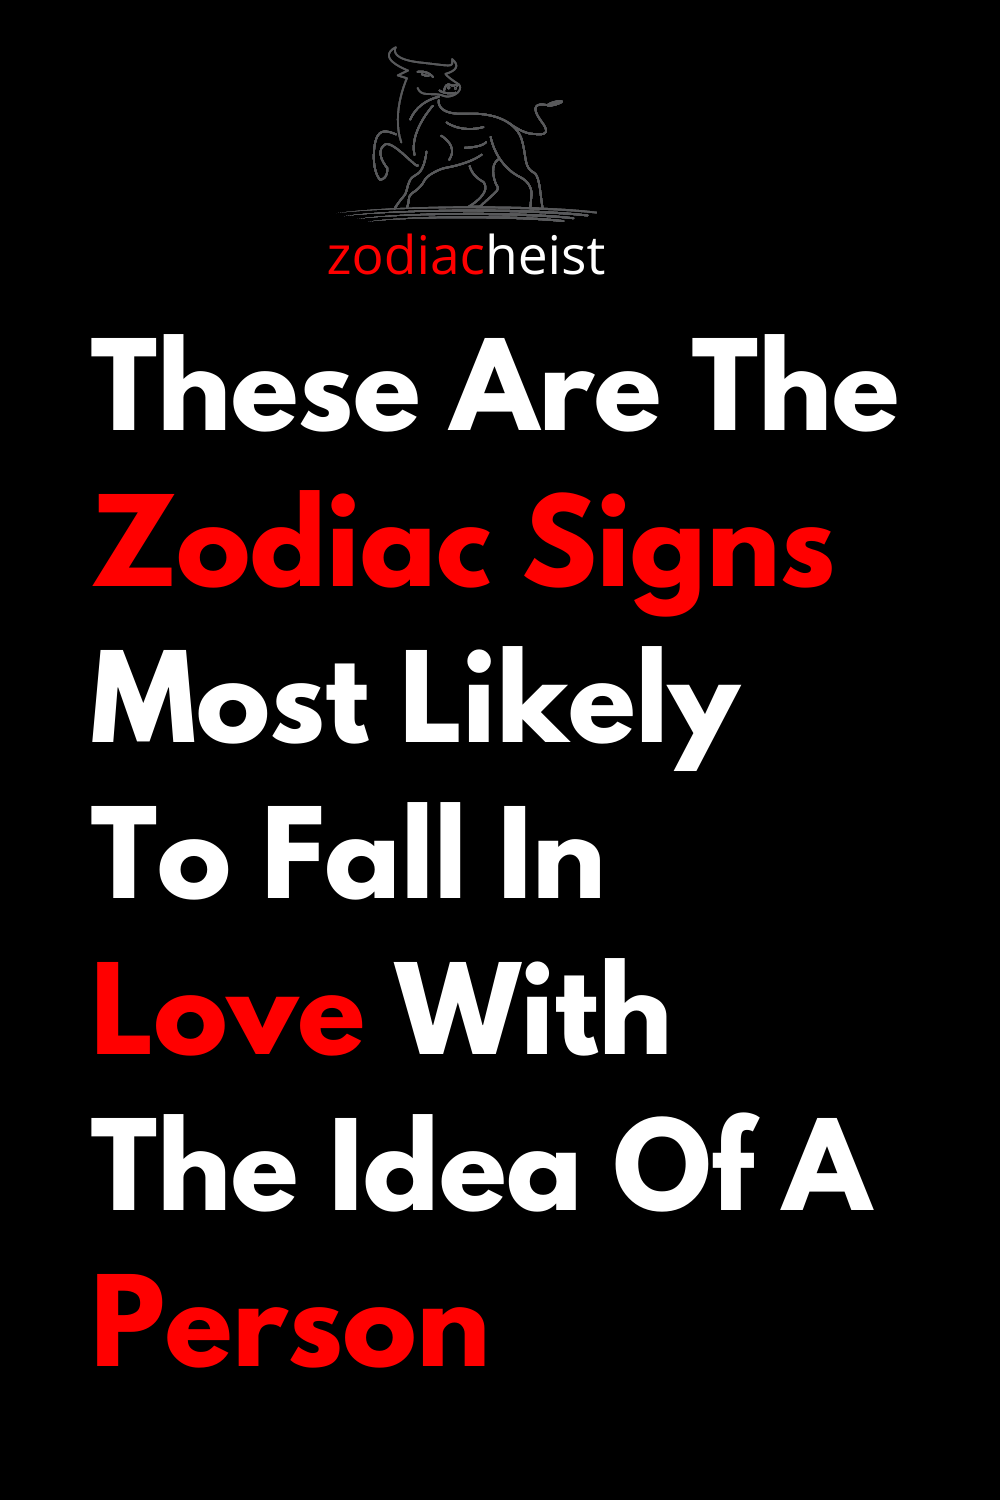 These Are The Zodiac Signs Most Likely To Fall In Love With The Idea Of A Person